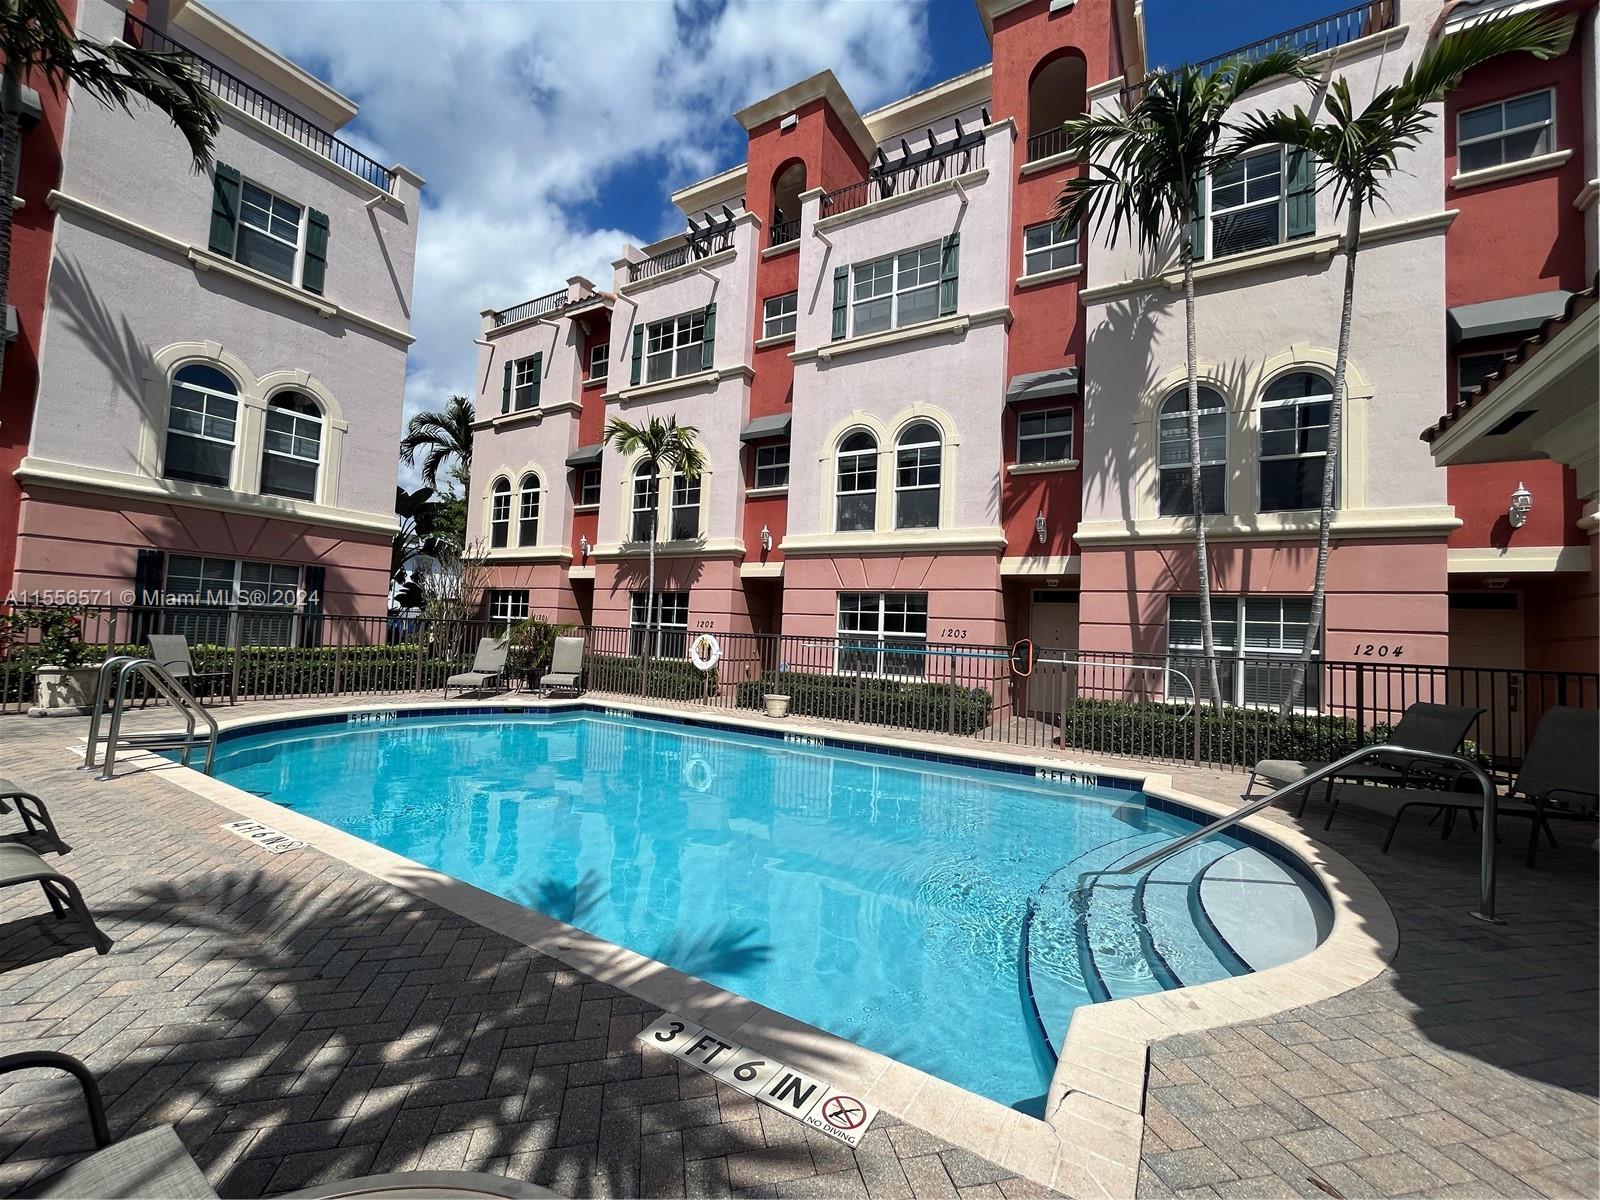 View Fort Lauderdale, FL 33304 townhome